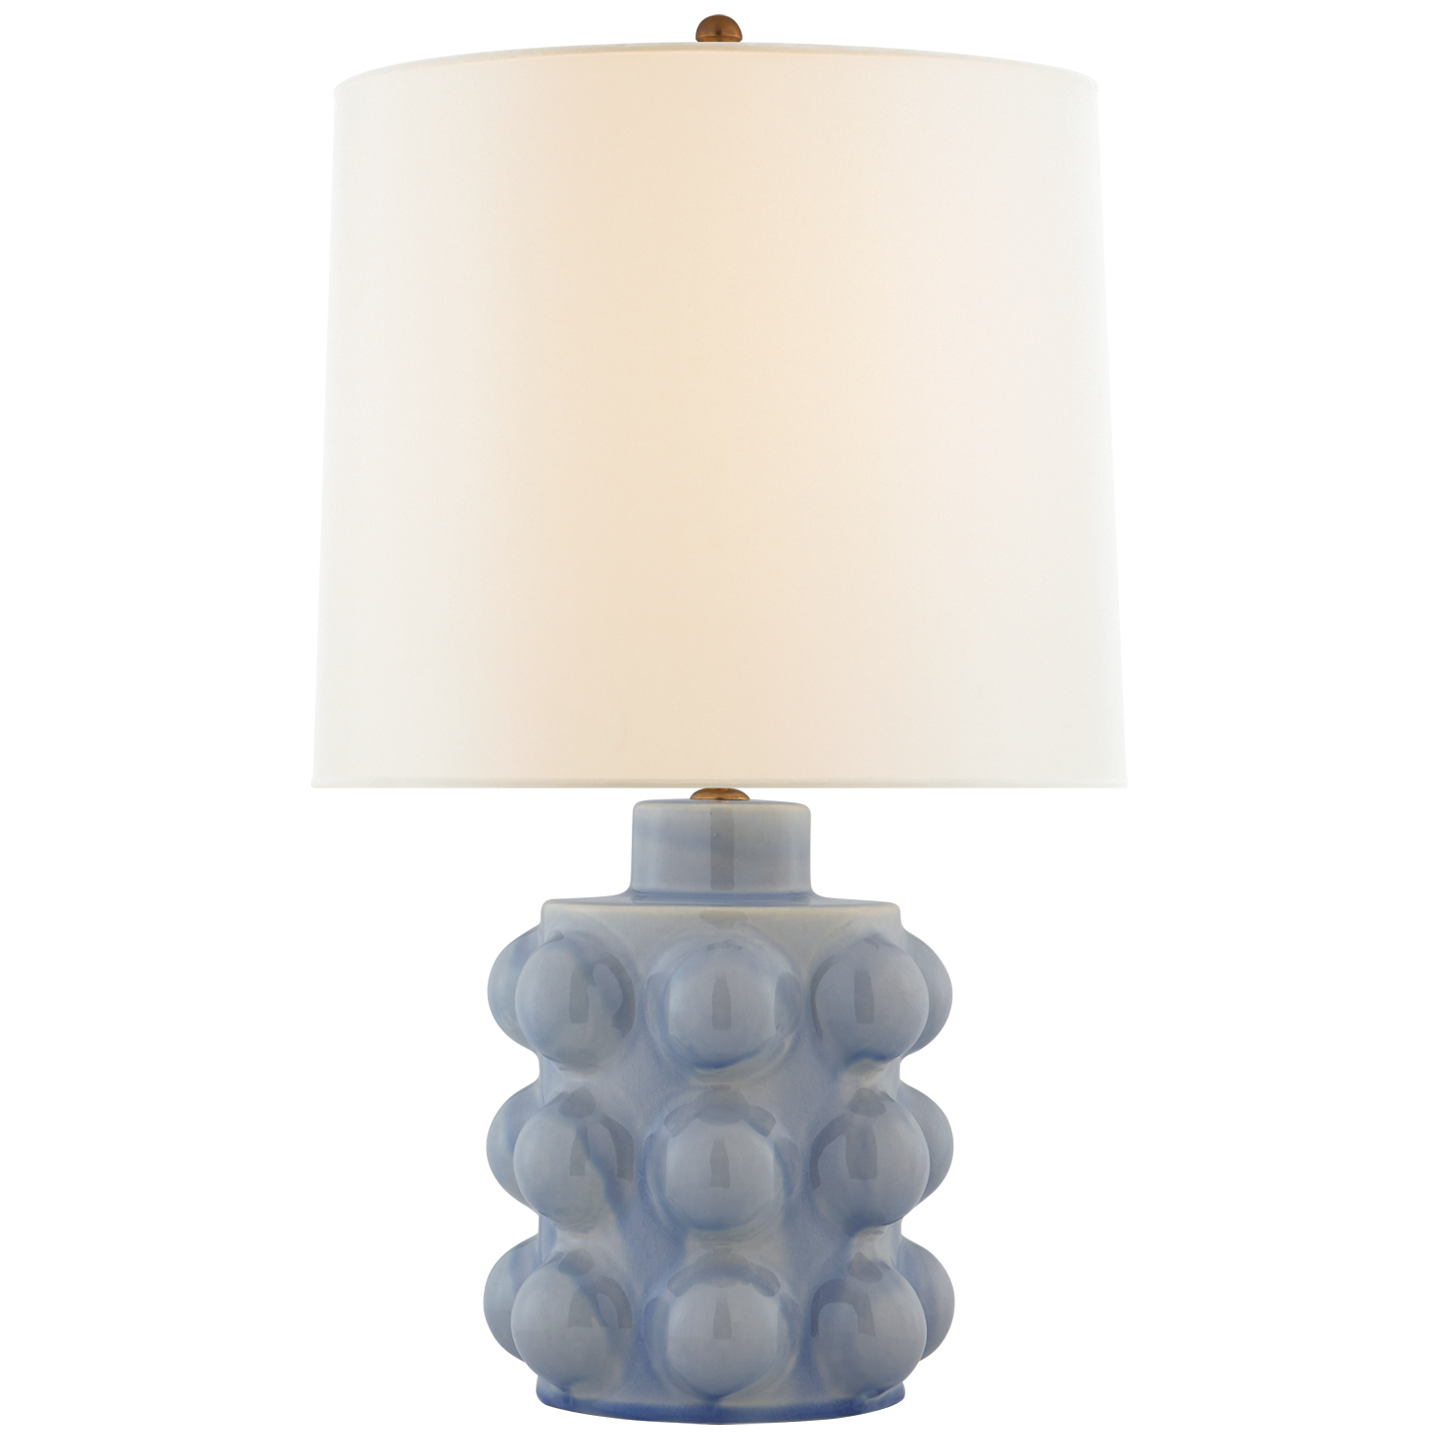 We love the form shape of this Vedra Medium Table Lamp. The dimmer feature makes it a perfect choice for your bedroom, living room, or other area that is perfect for setting the mood.   Reactive Ceramic Glazes Will Vary in Color and Texture  Designer: AERIN  Height: 26.75" Width: 16.5" Base: 7.5" Round Socket: E26 Dimmer Wattage: 100 A19